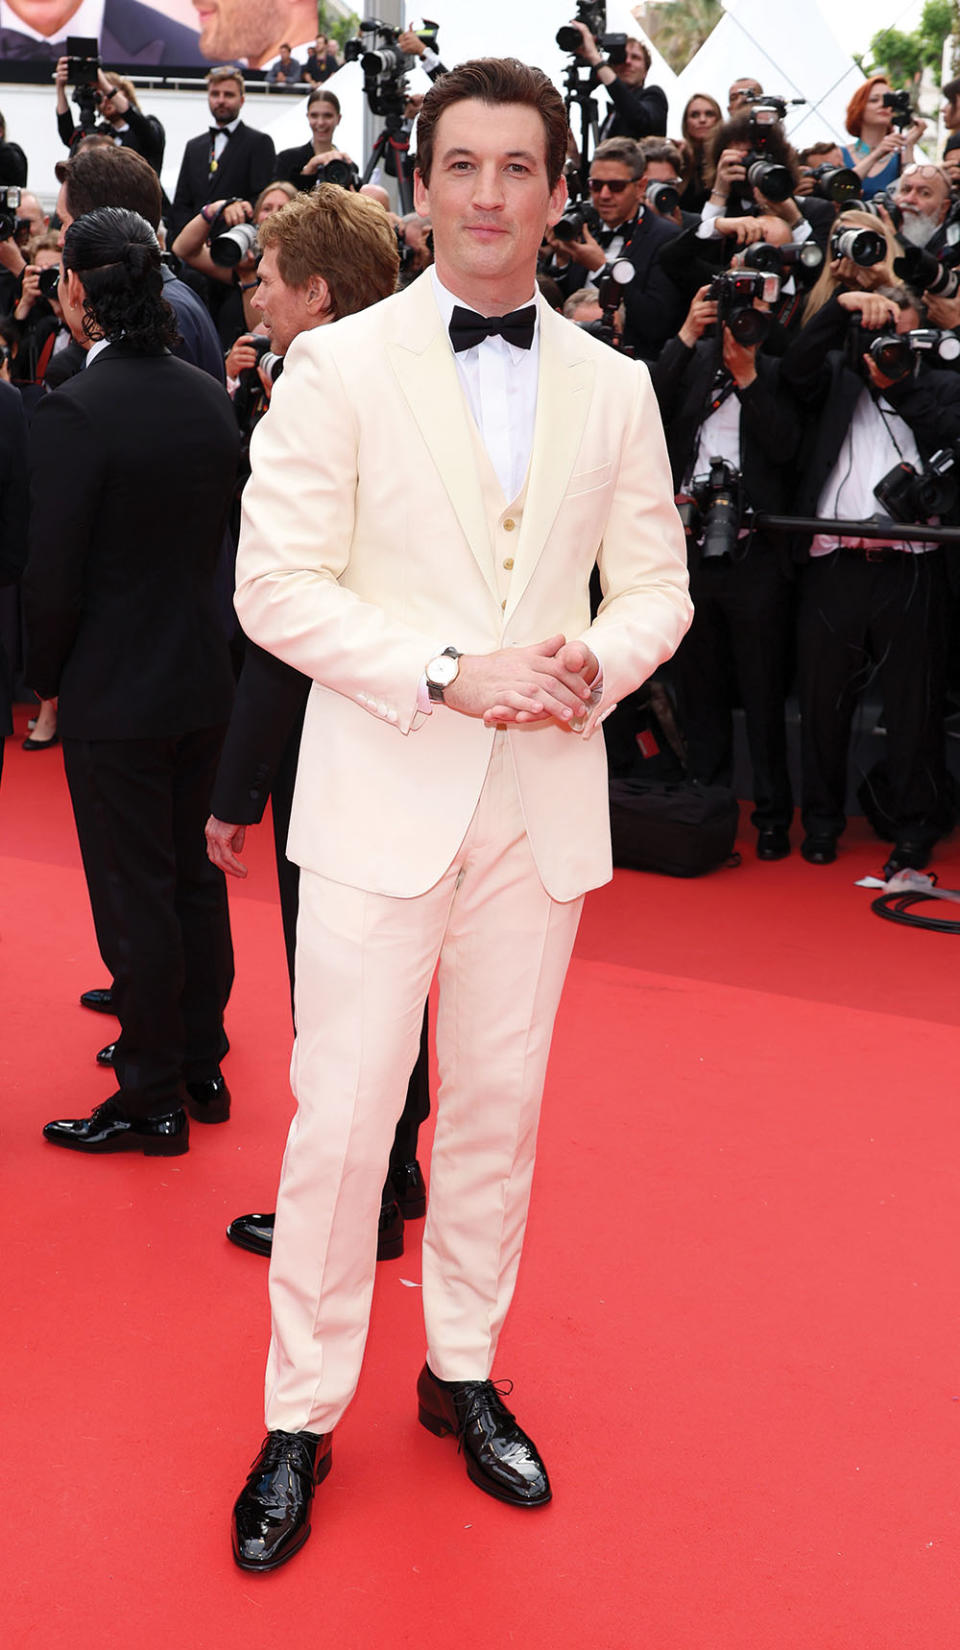 For the Top Gun: Maverick premiere at Cannes, the Ferreiras dressed Miles Teller in a cream-colored Celine tux